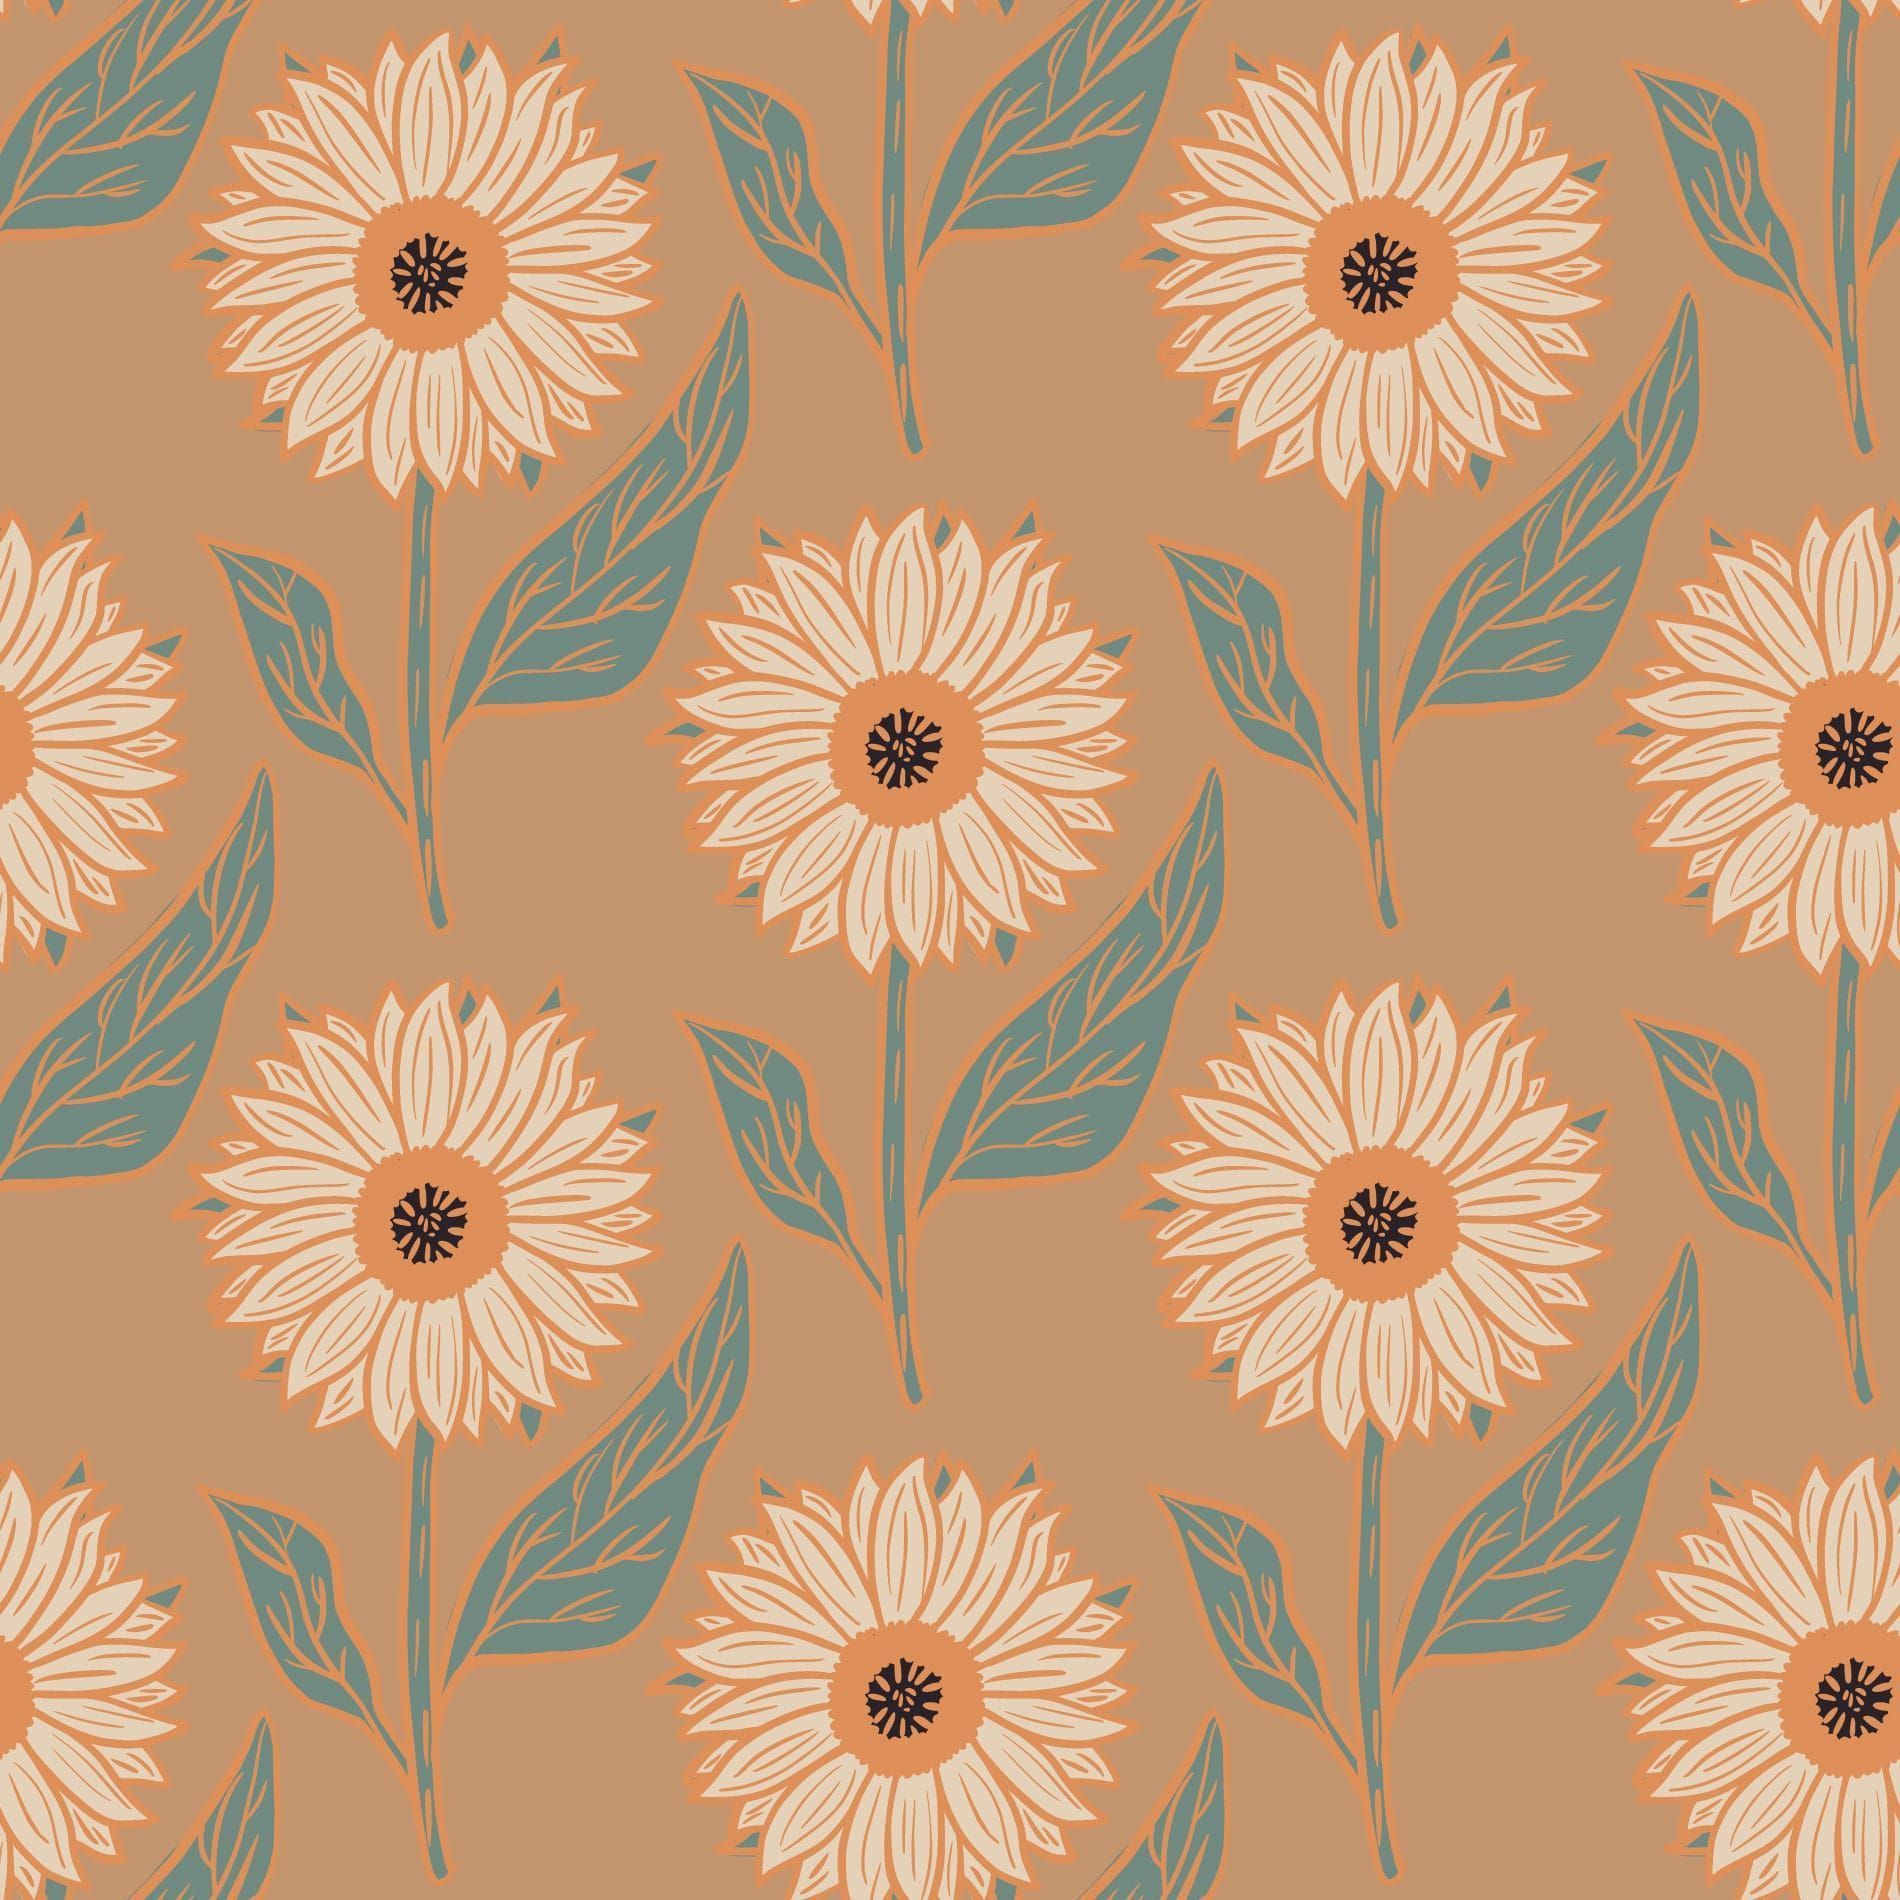 Aesthetic Sunflower Wallpaper And Stick Or Non Pasted